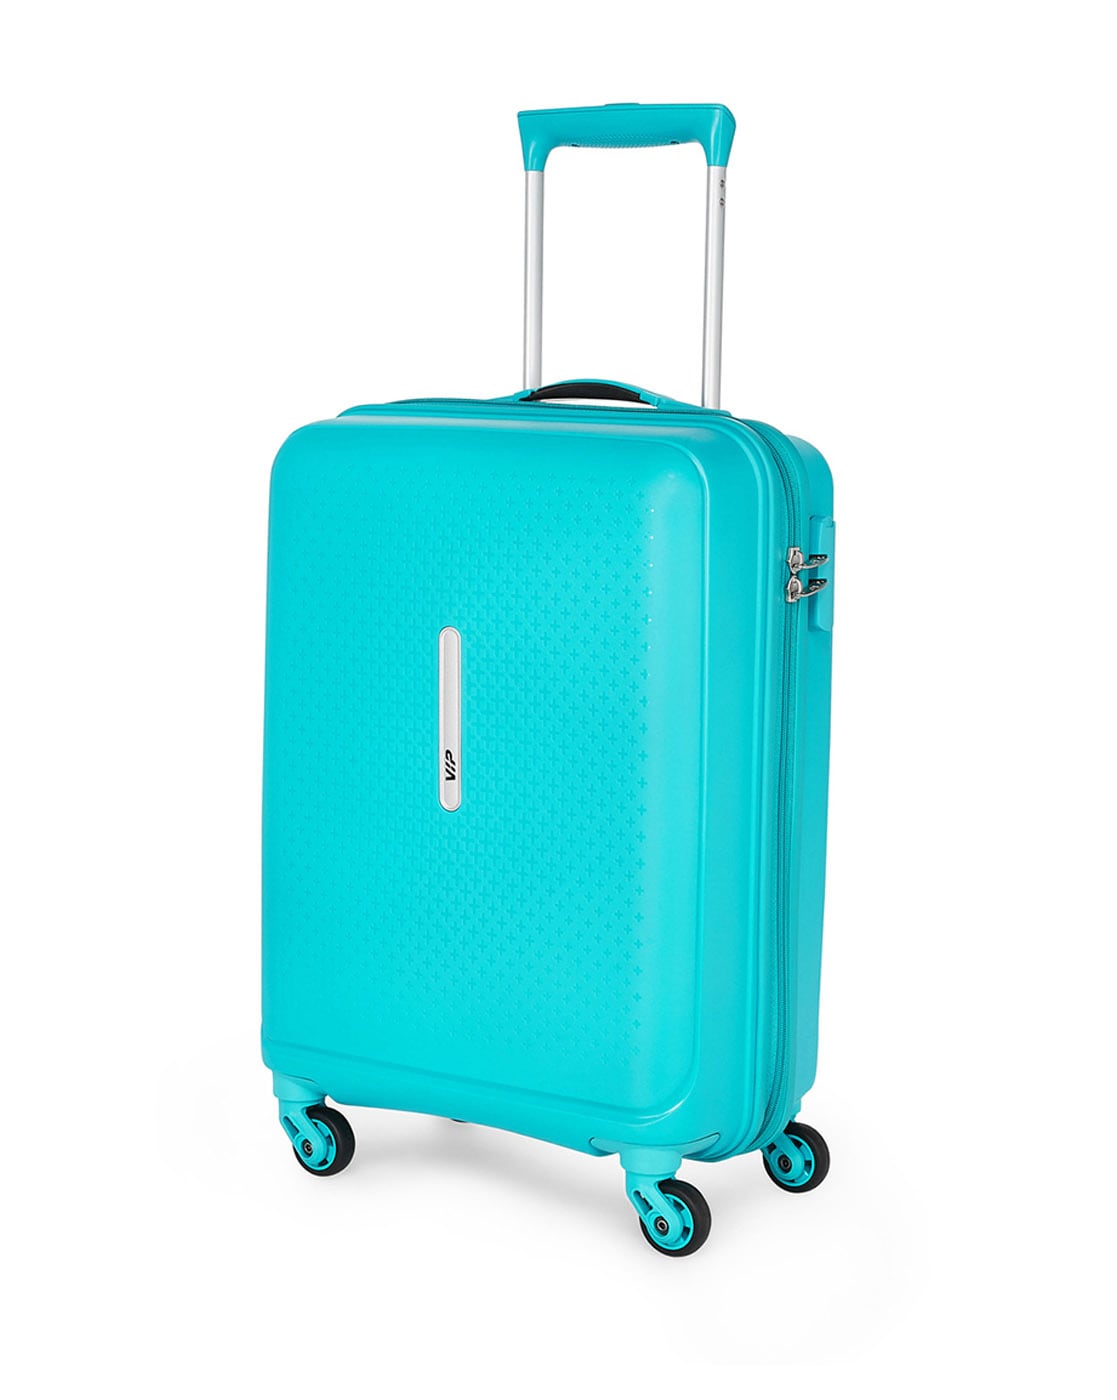 lugage corner red trolly bag set of 3(55,65,75) suitcase Expandable Cabin &  Check-in Set 4 Wheels - 40 inch red - Price in India | Flipkart.com